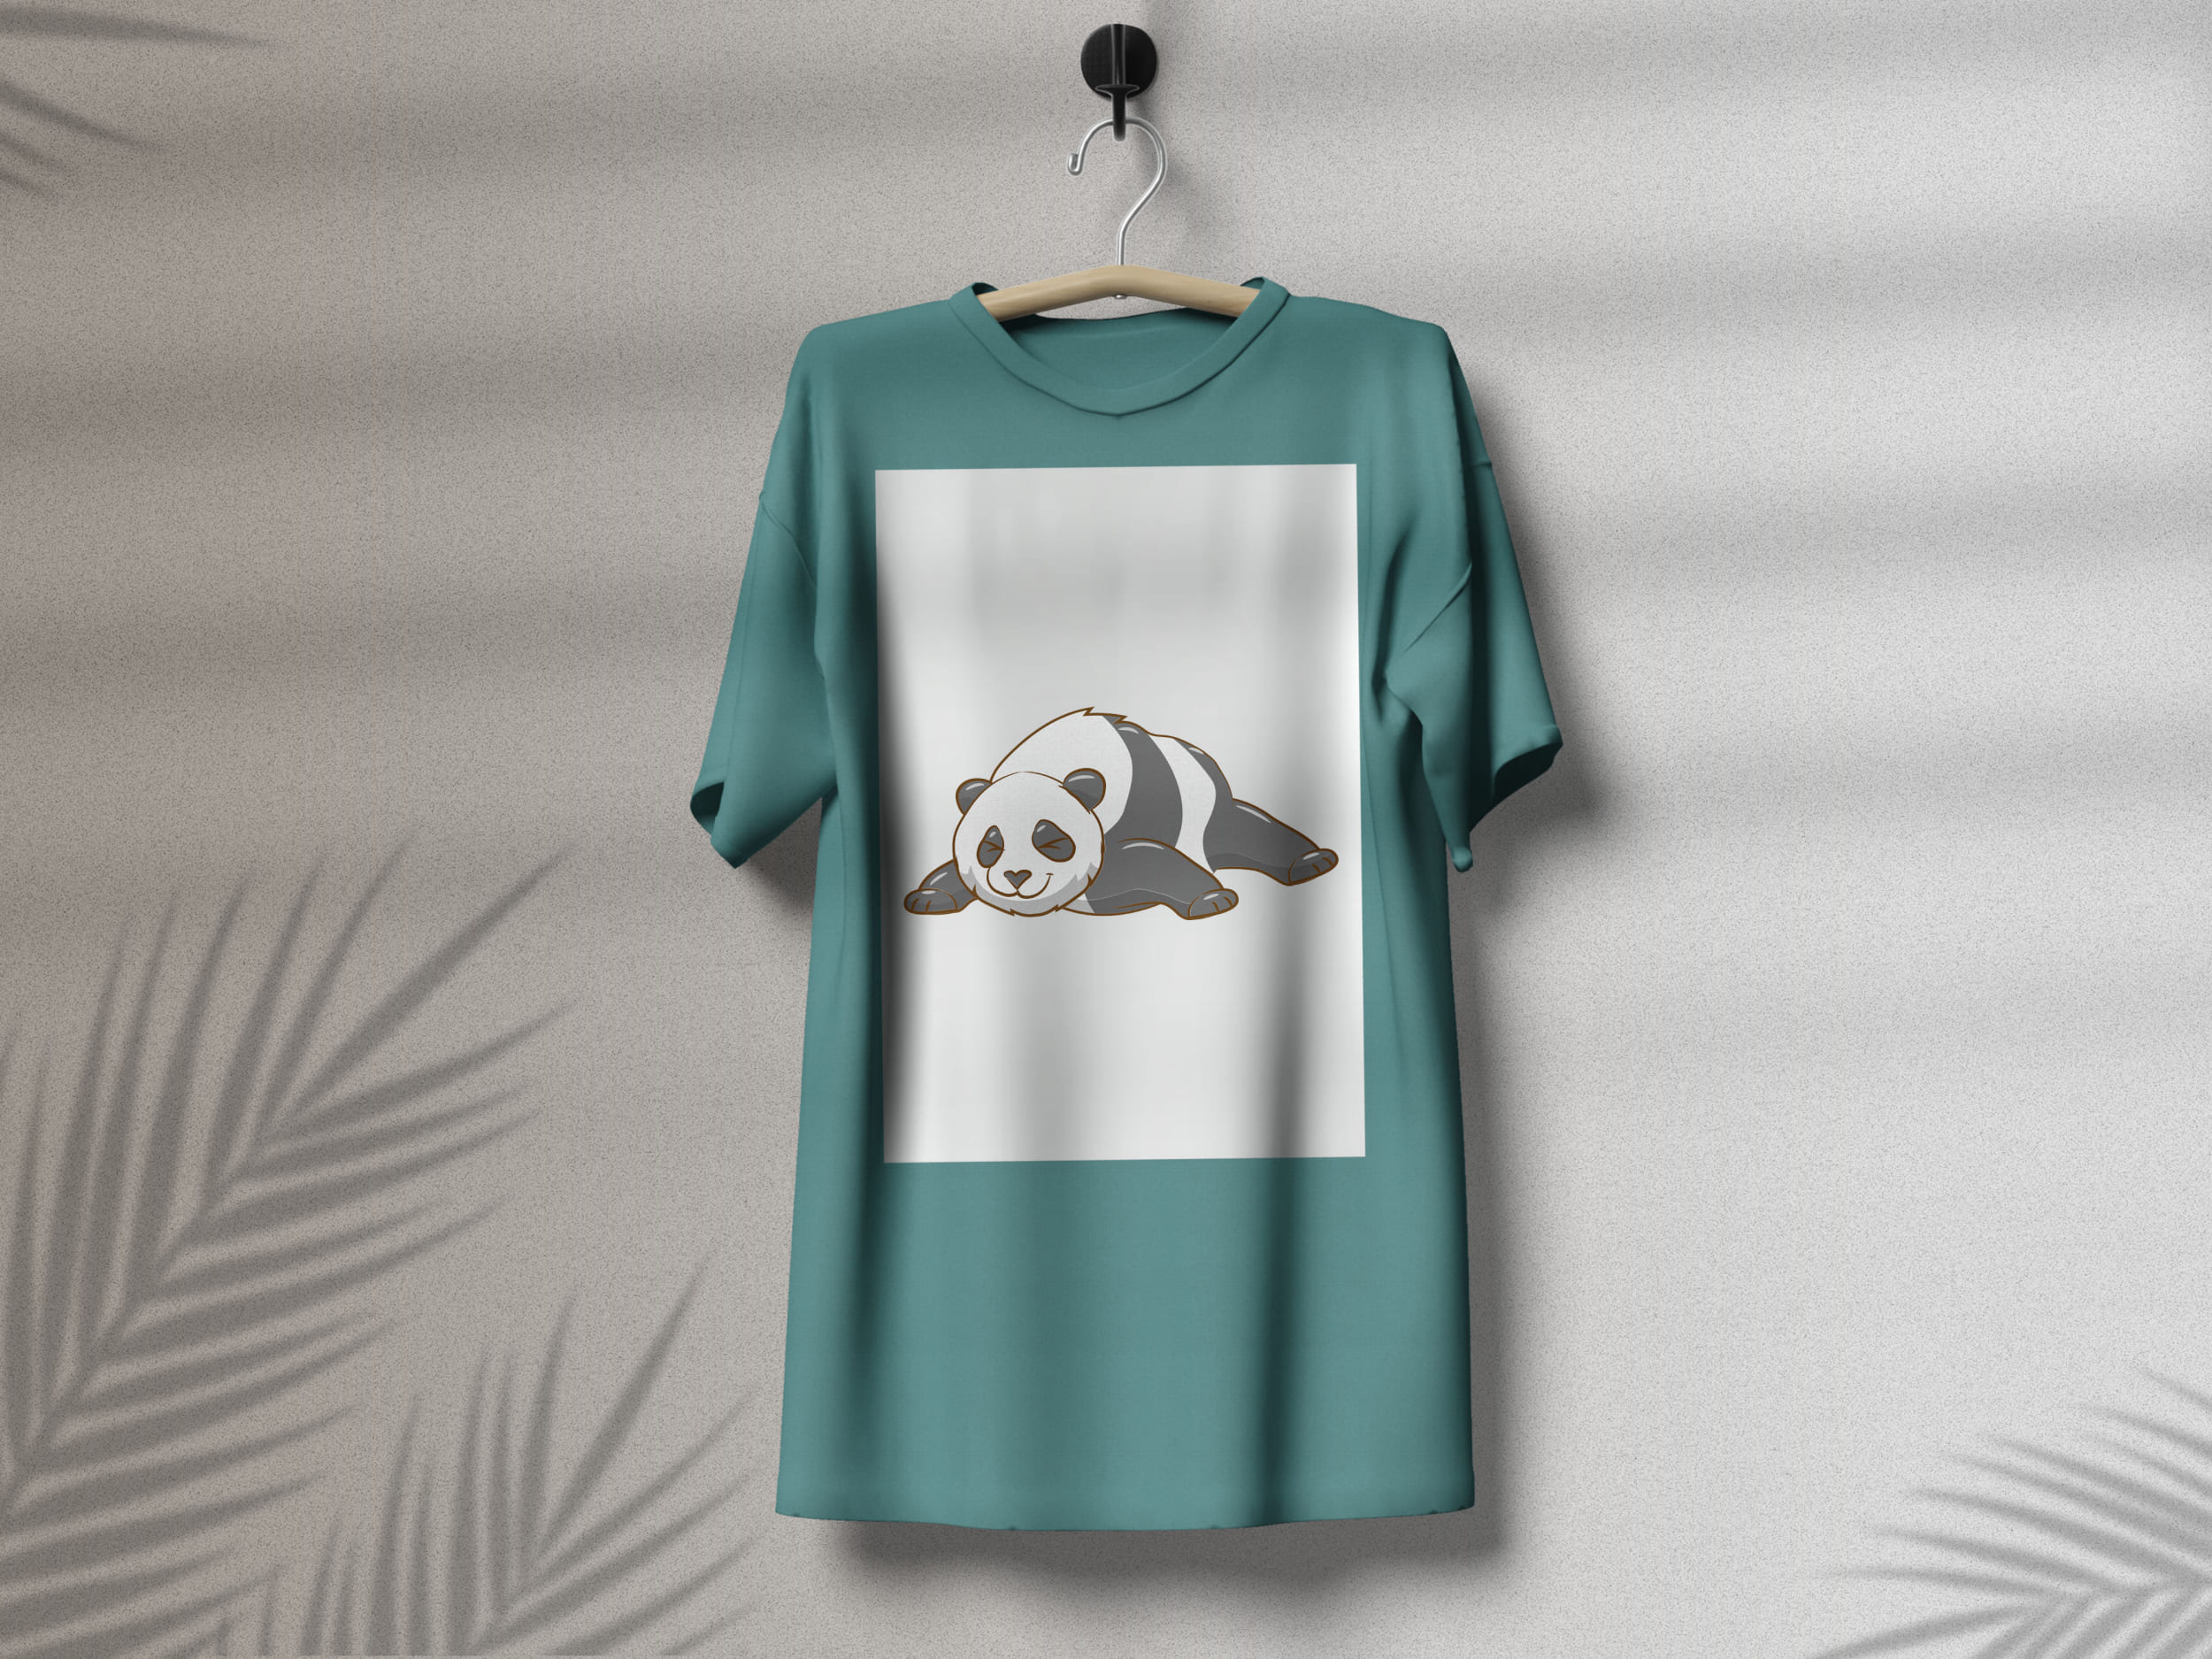 Turquoise t-shirt with a lying panda on a white background, on a hanger on a gray background